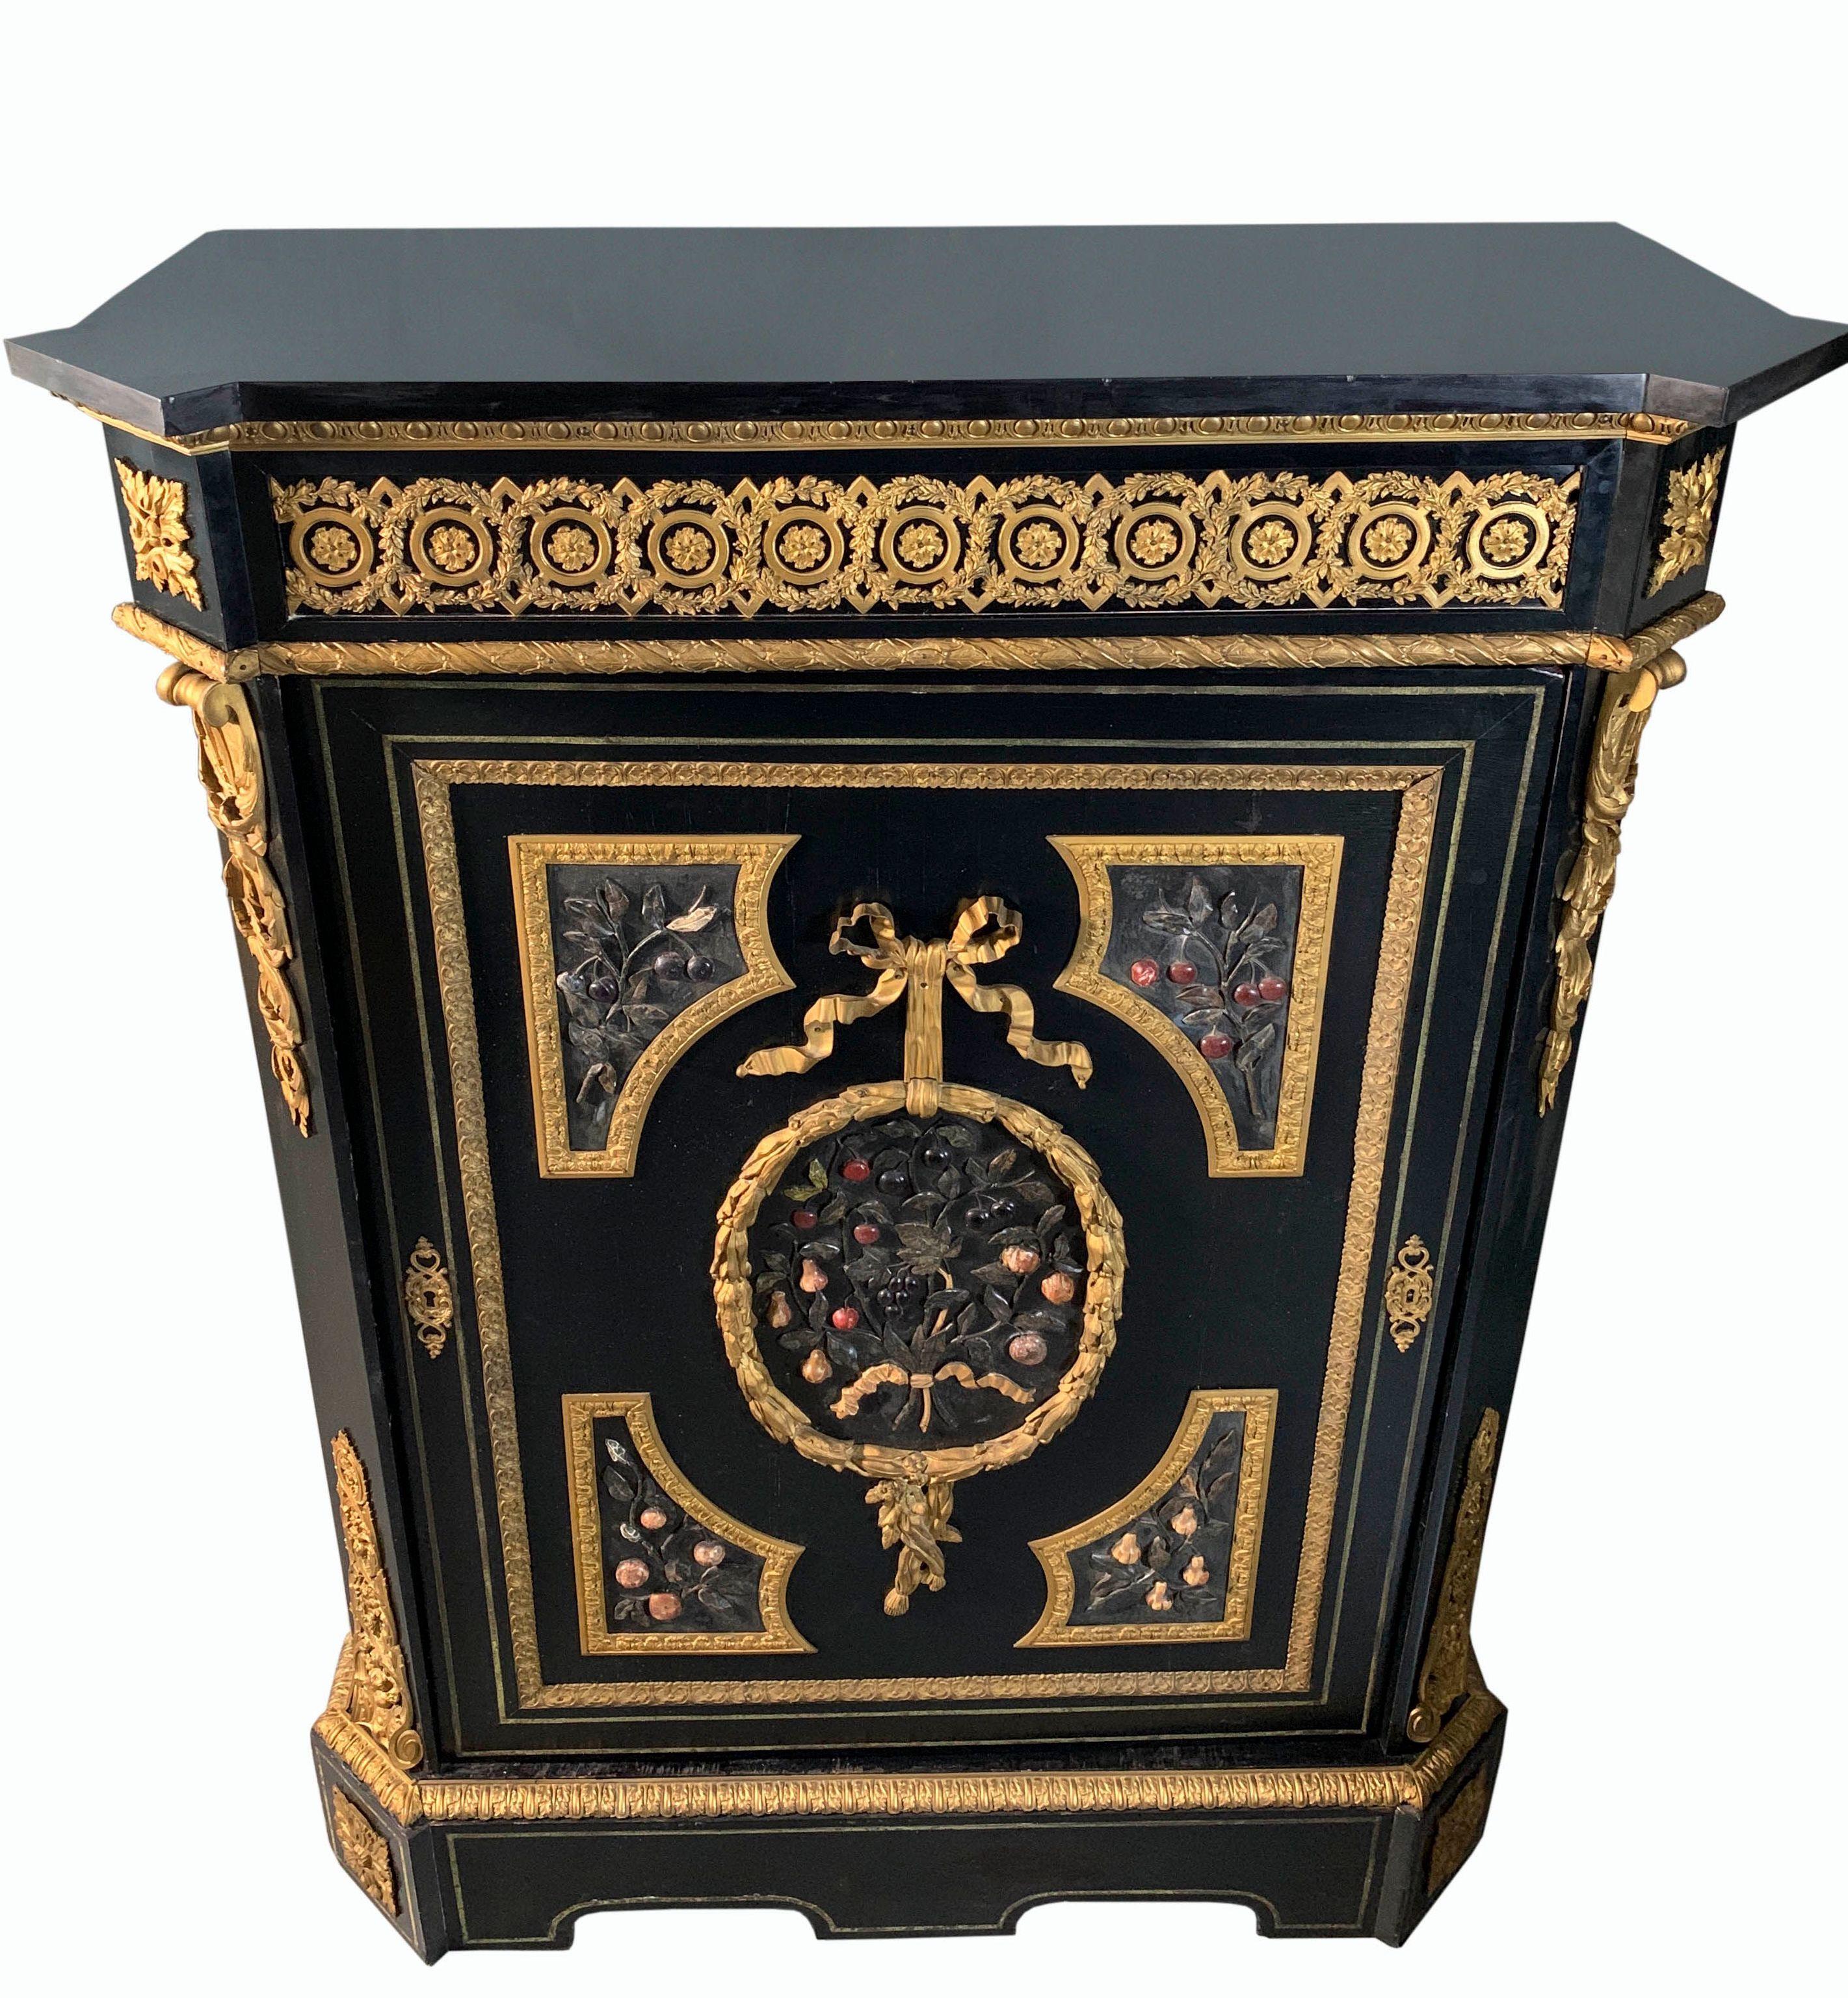 A VERY FINE ANTIQUE EBONIZED WOOD & ORMOLU MOUNTED PIETRA-DURA CABINET

France, Late 19th Century


Height: 53